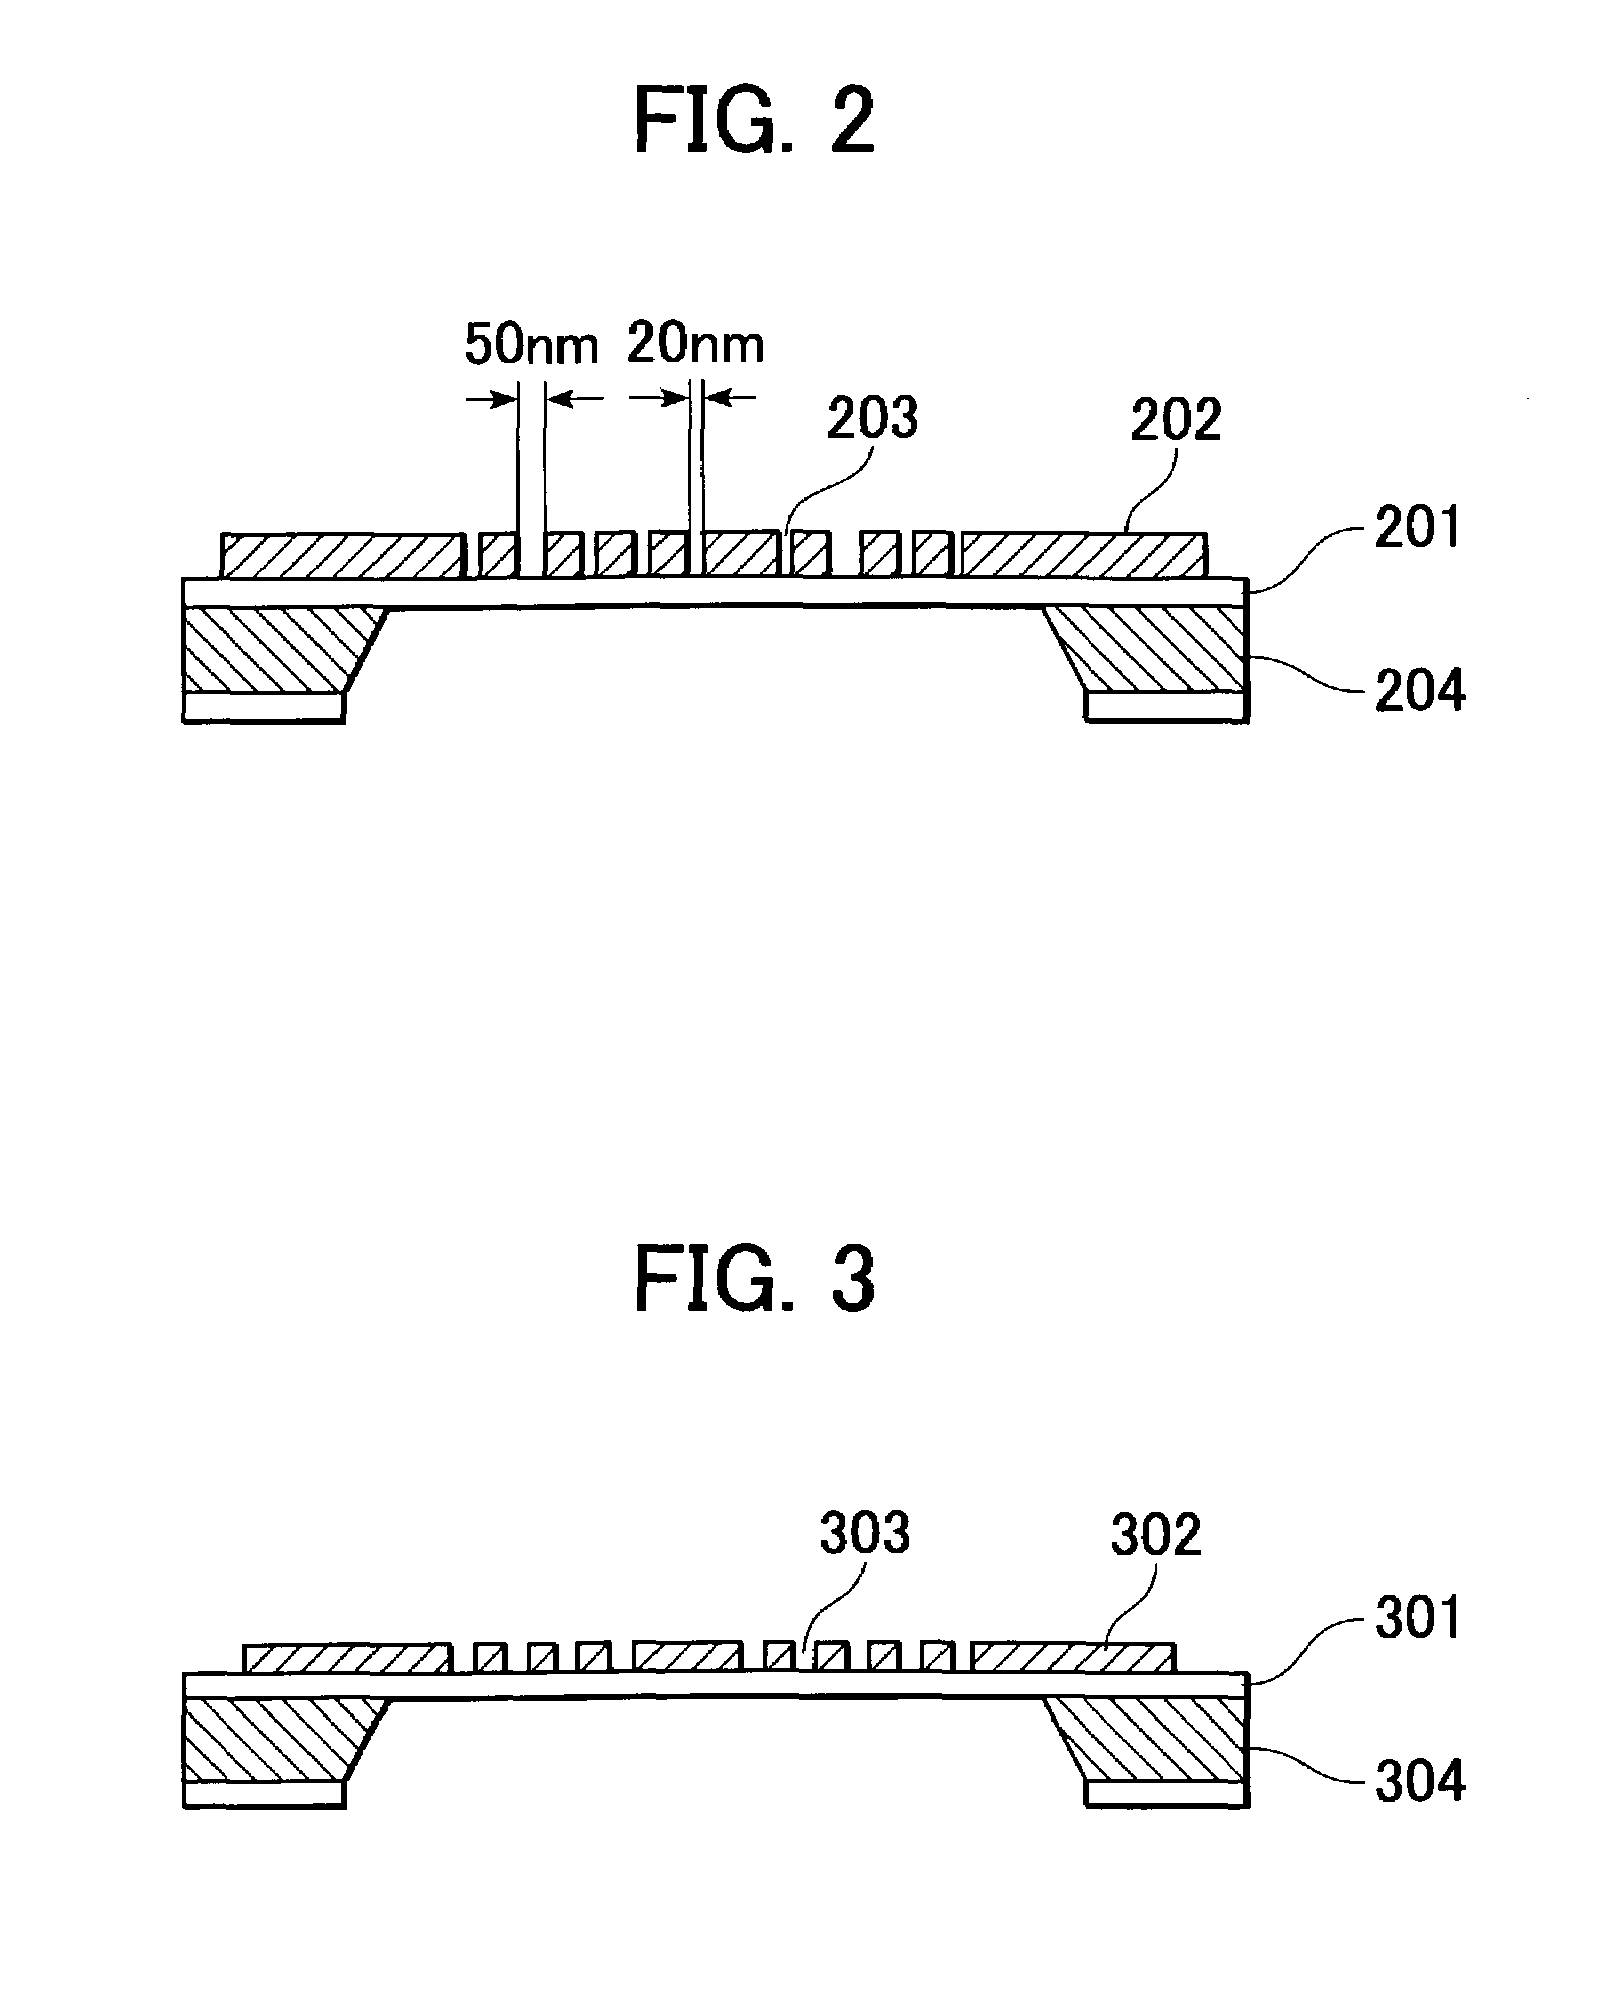 Photomask for near-field exposure and exposure apparatus including the photomask for making a pattern